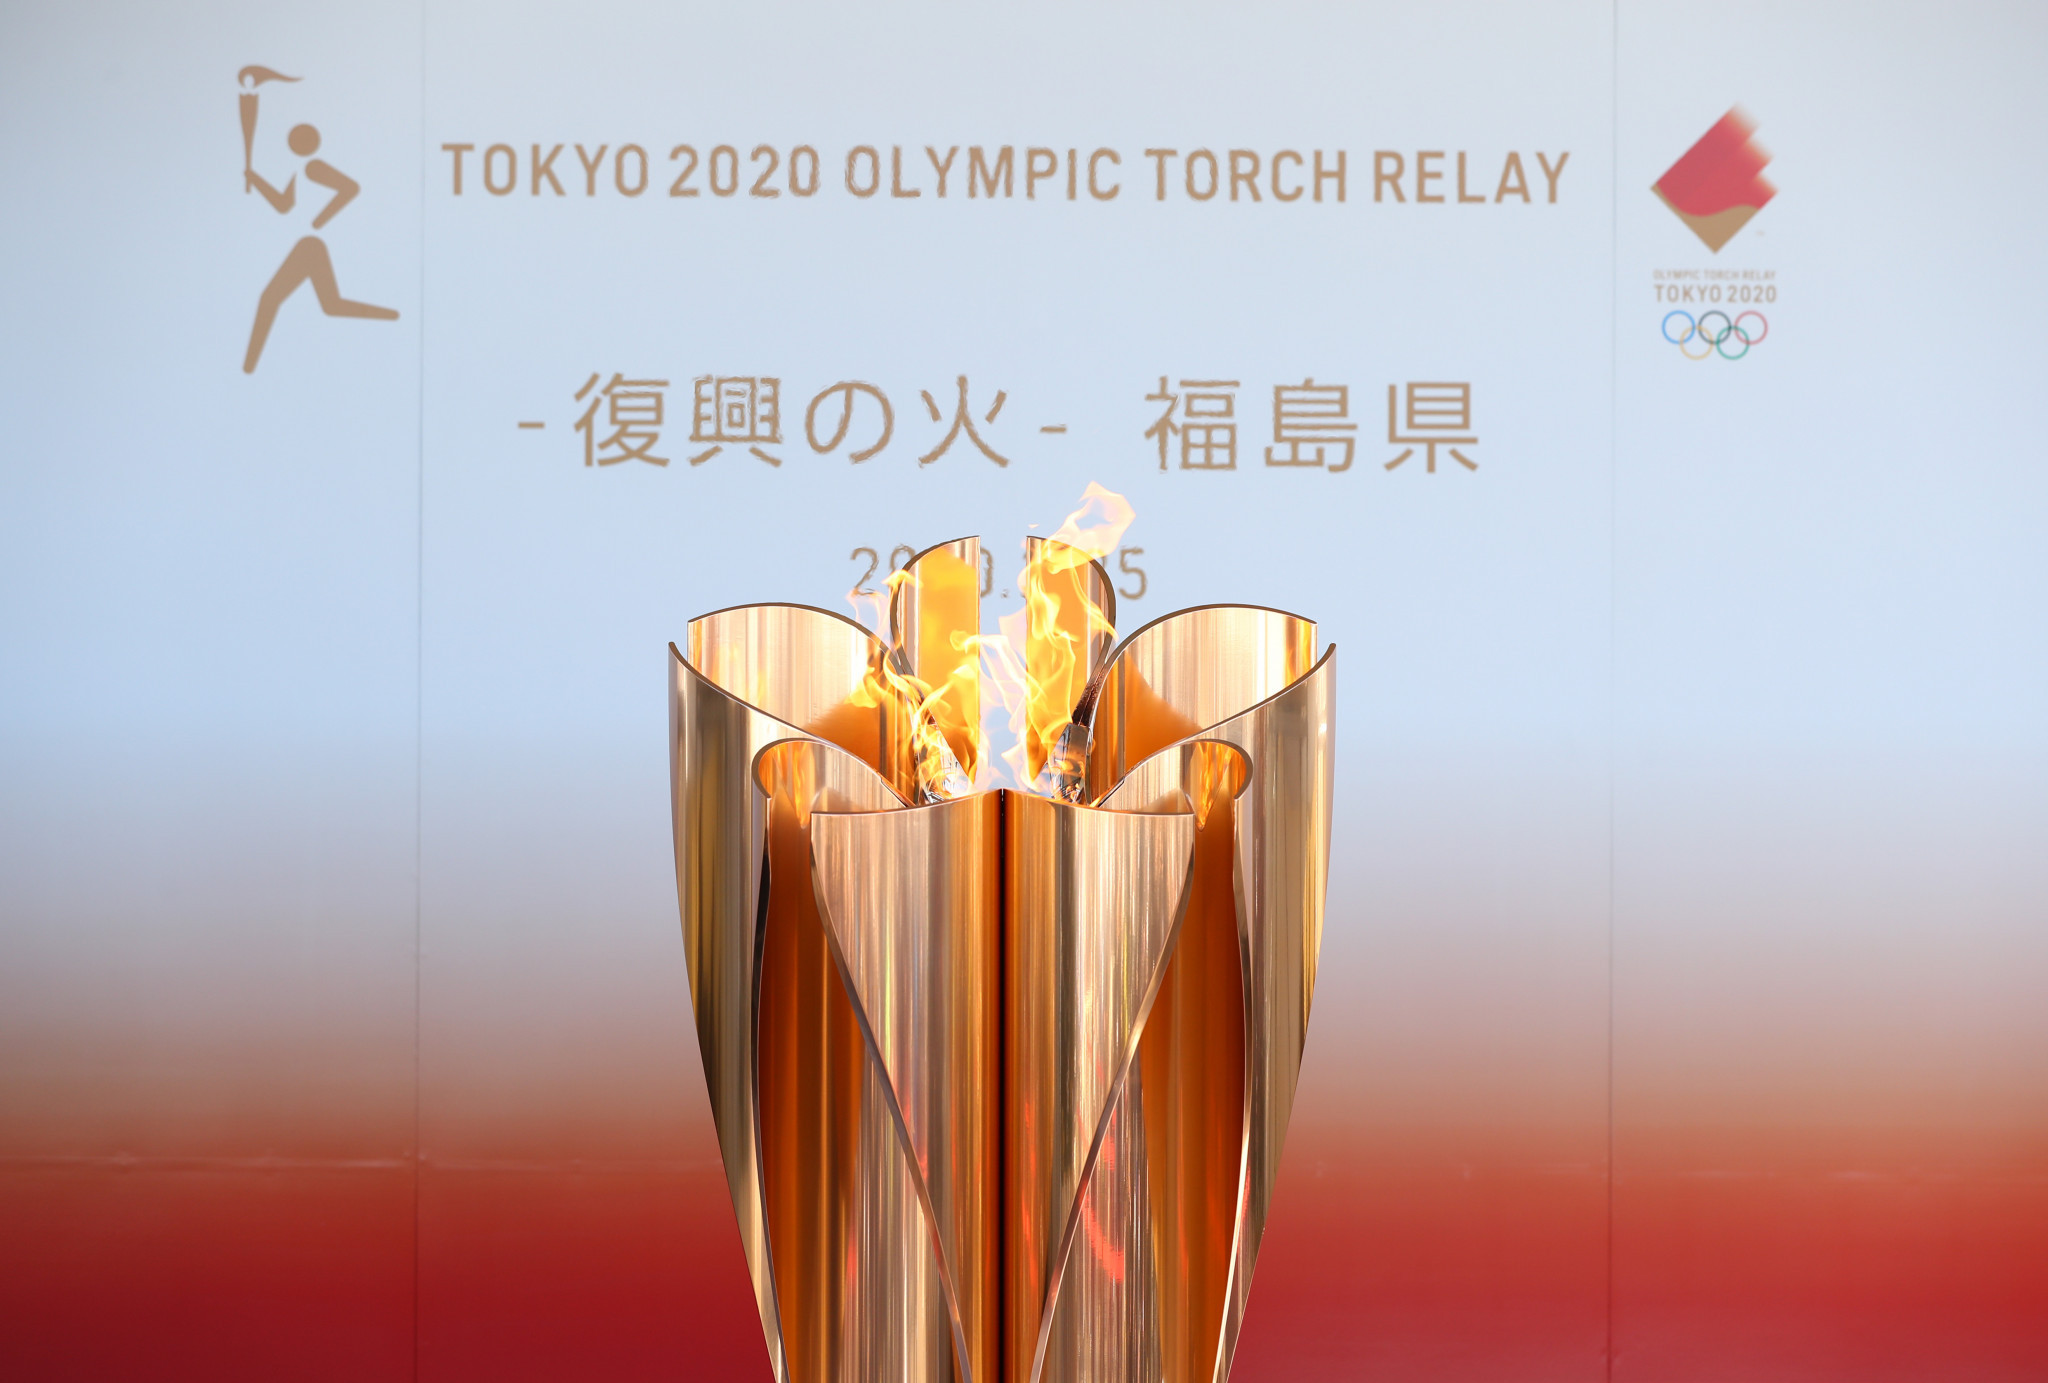 Schedule announced for Tokyo leg of Olympic Torch Relay with nod to